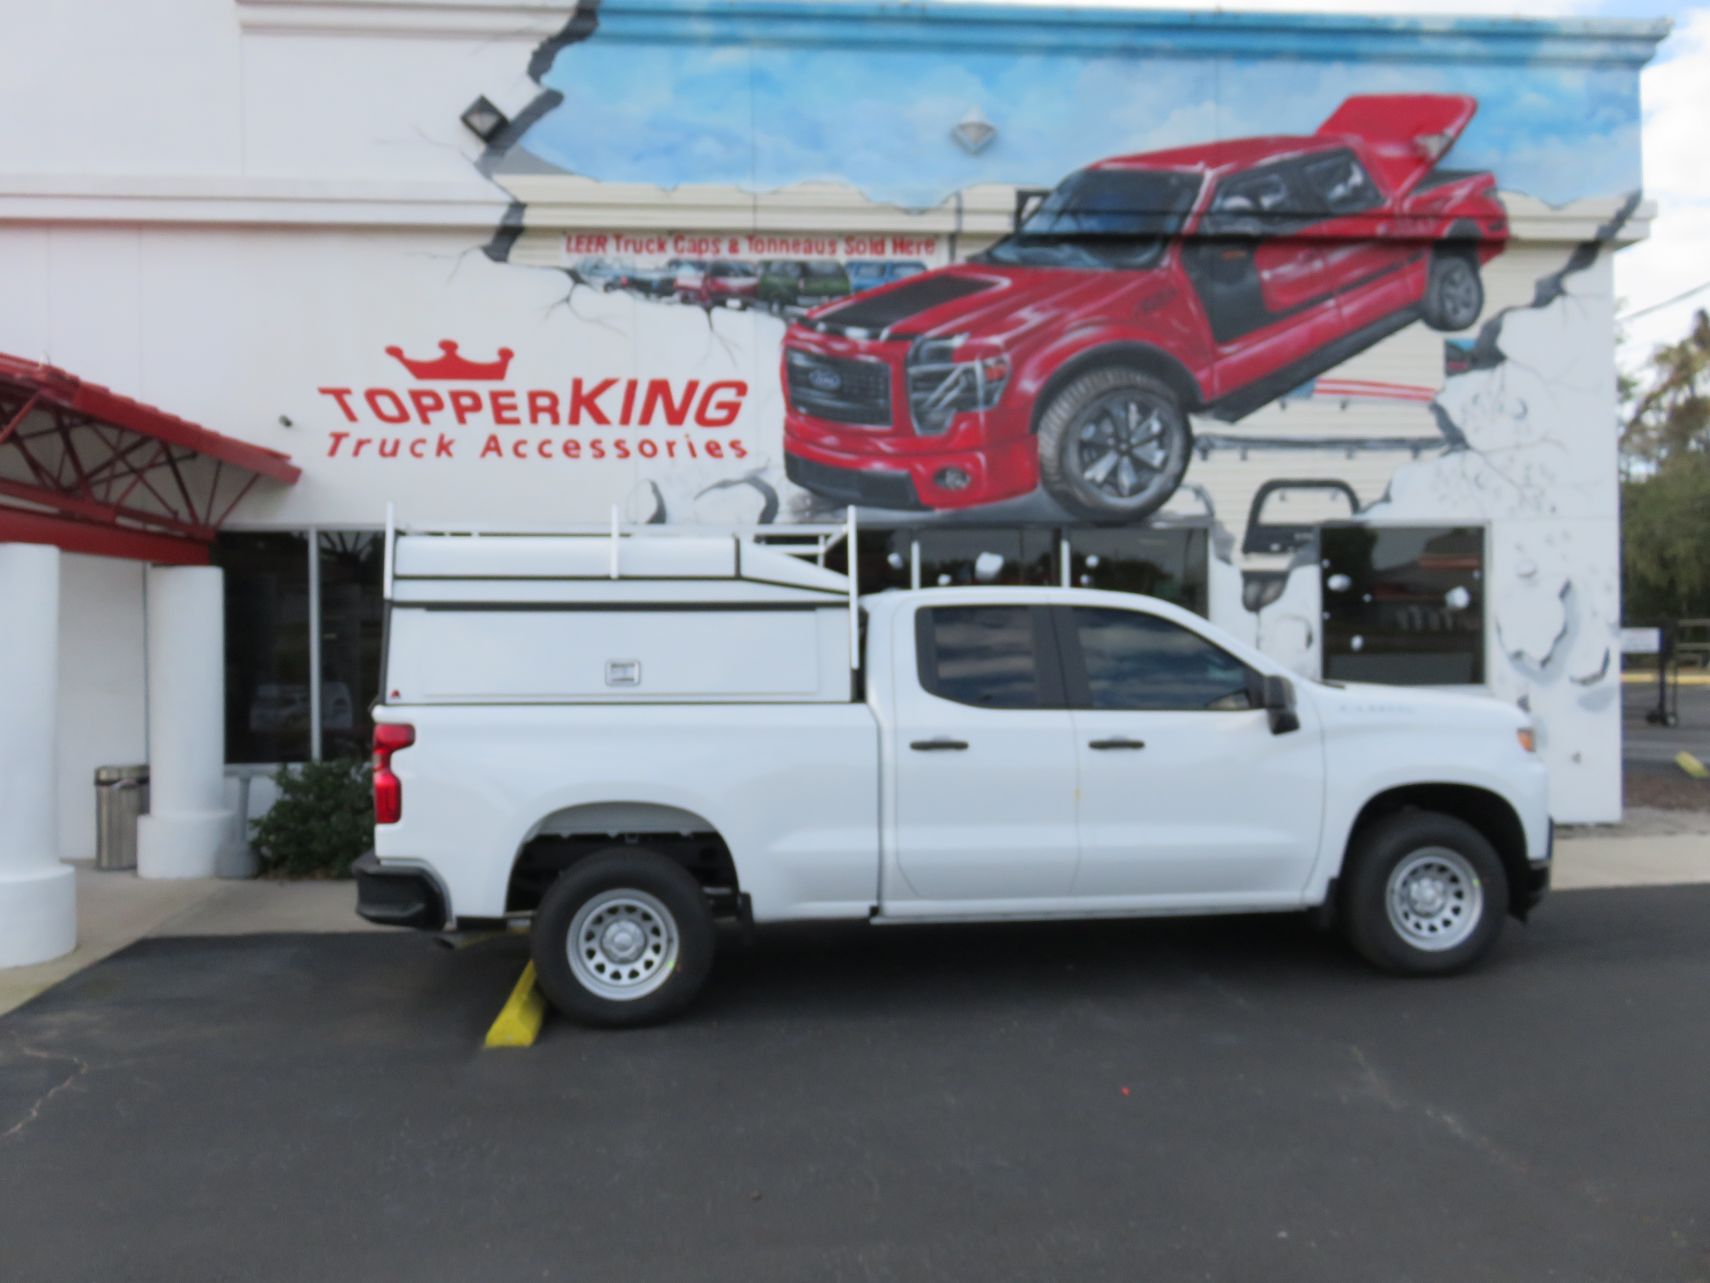 2020 Chevy Silverado with LEER DCC, Roof Racks, Hitch, and Tint by TopperKING in Brandon, FL 813-689-2449 or Clearwater, FL 727-530-9066. Call today!